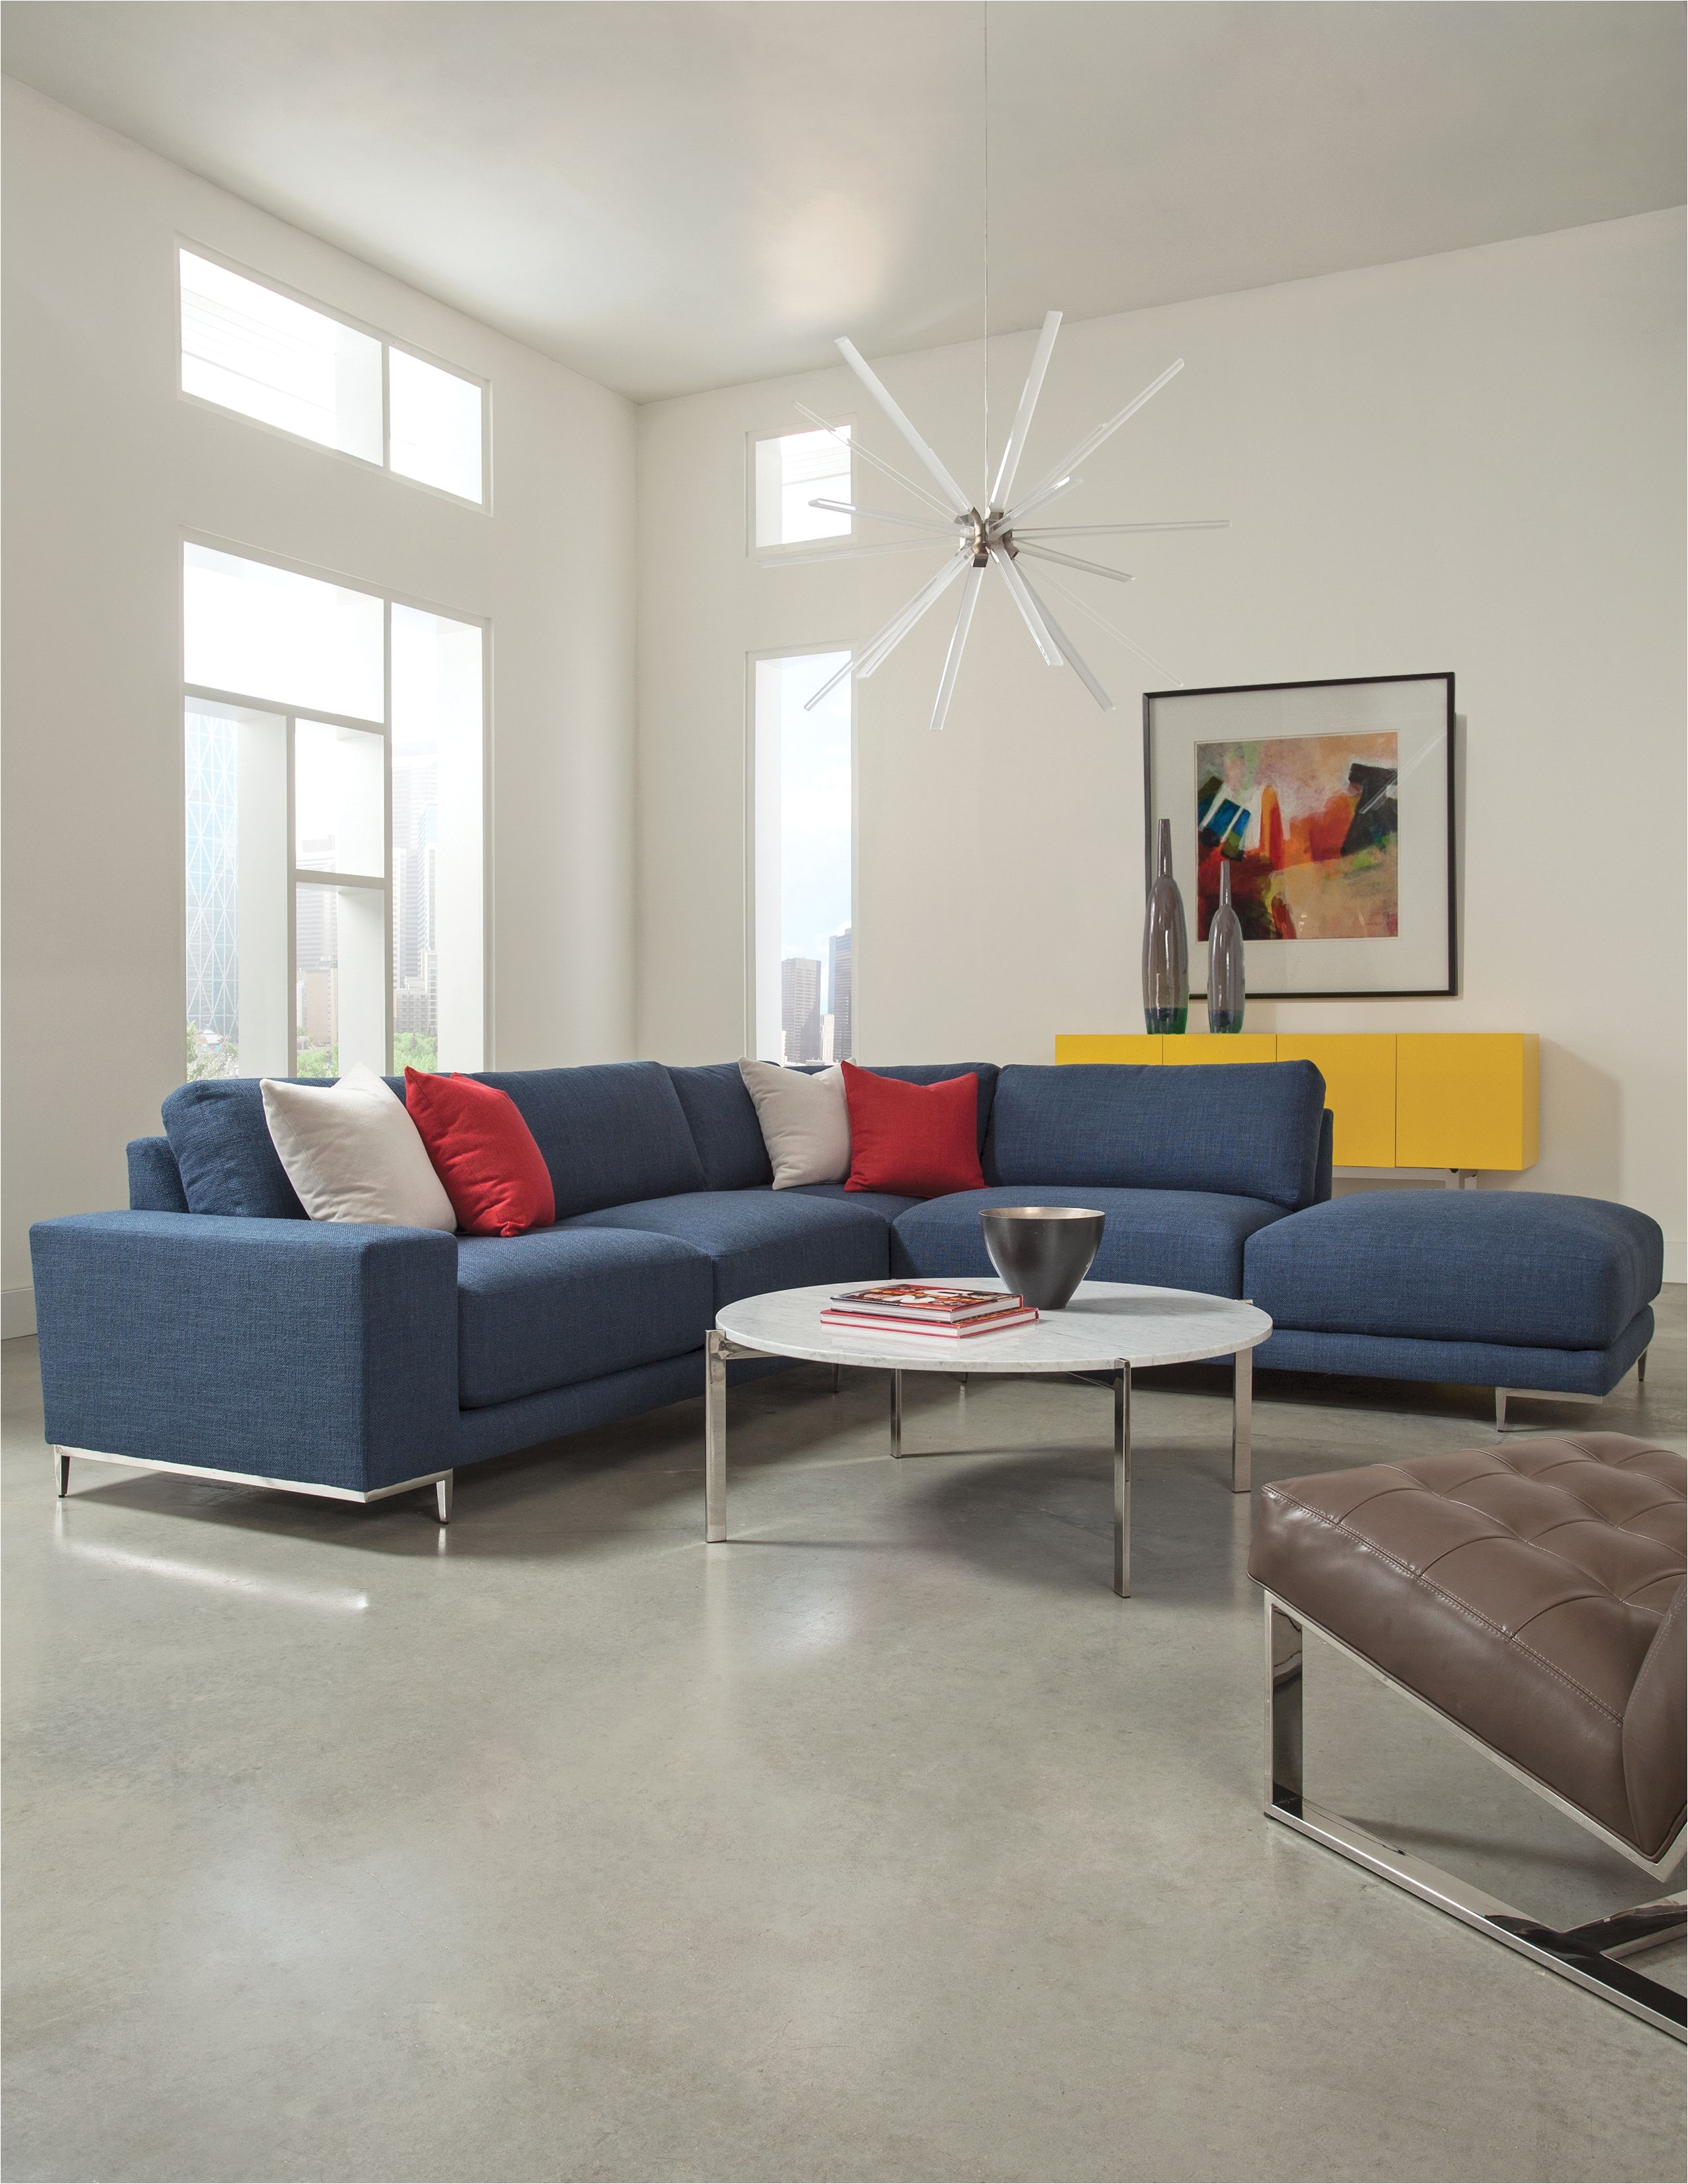 Hangover modular sectional sofa with Drop In cocktail table and Milo Baughman EZ Rider armless lounge chair from Thayer Coggin